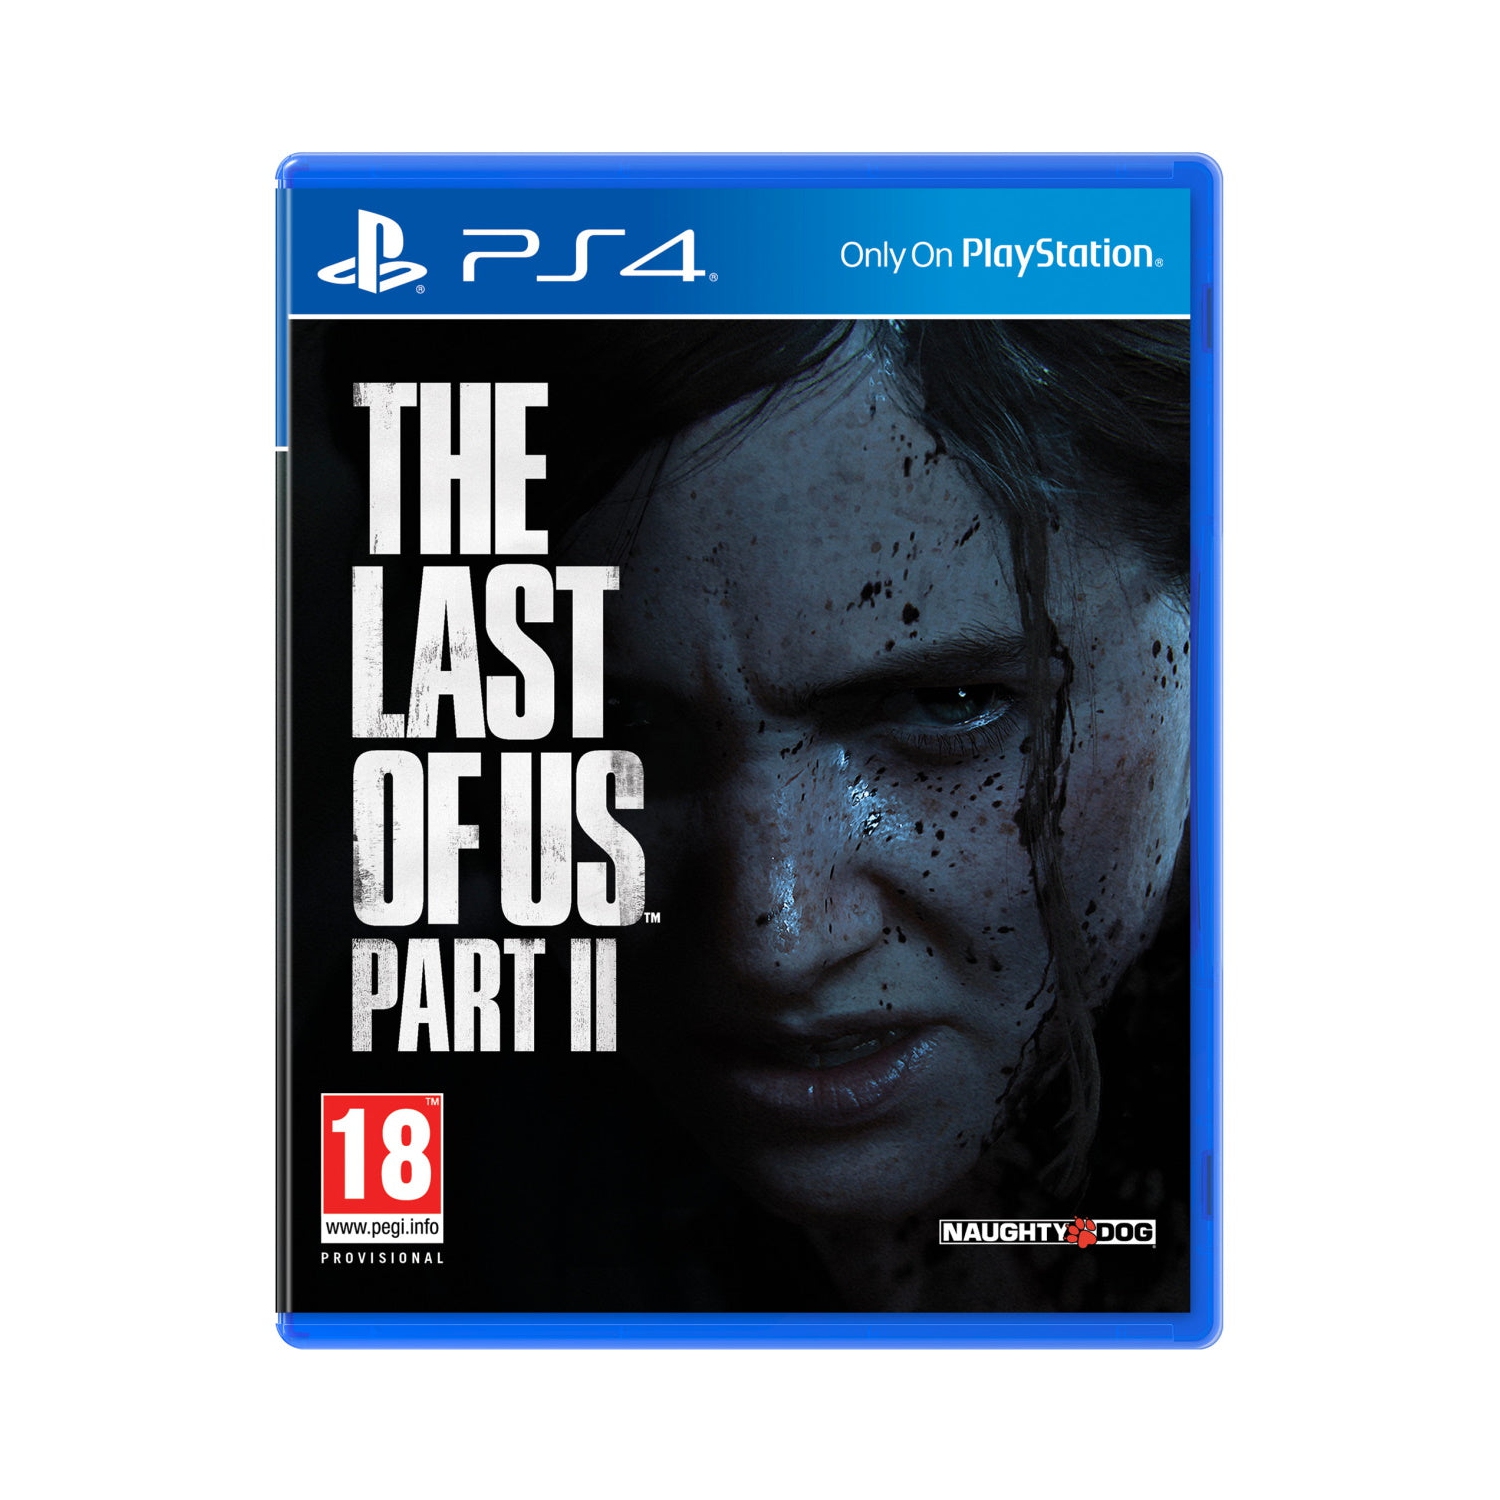 The Last Of Us Part II [PlayStation 4]